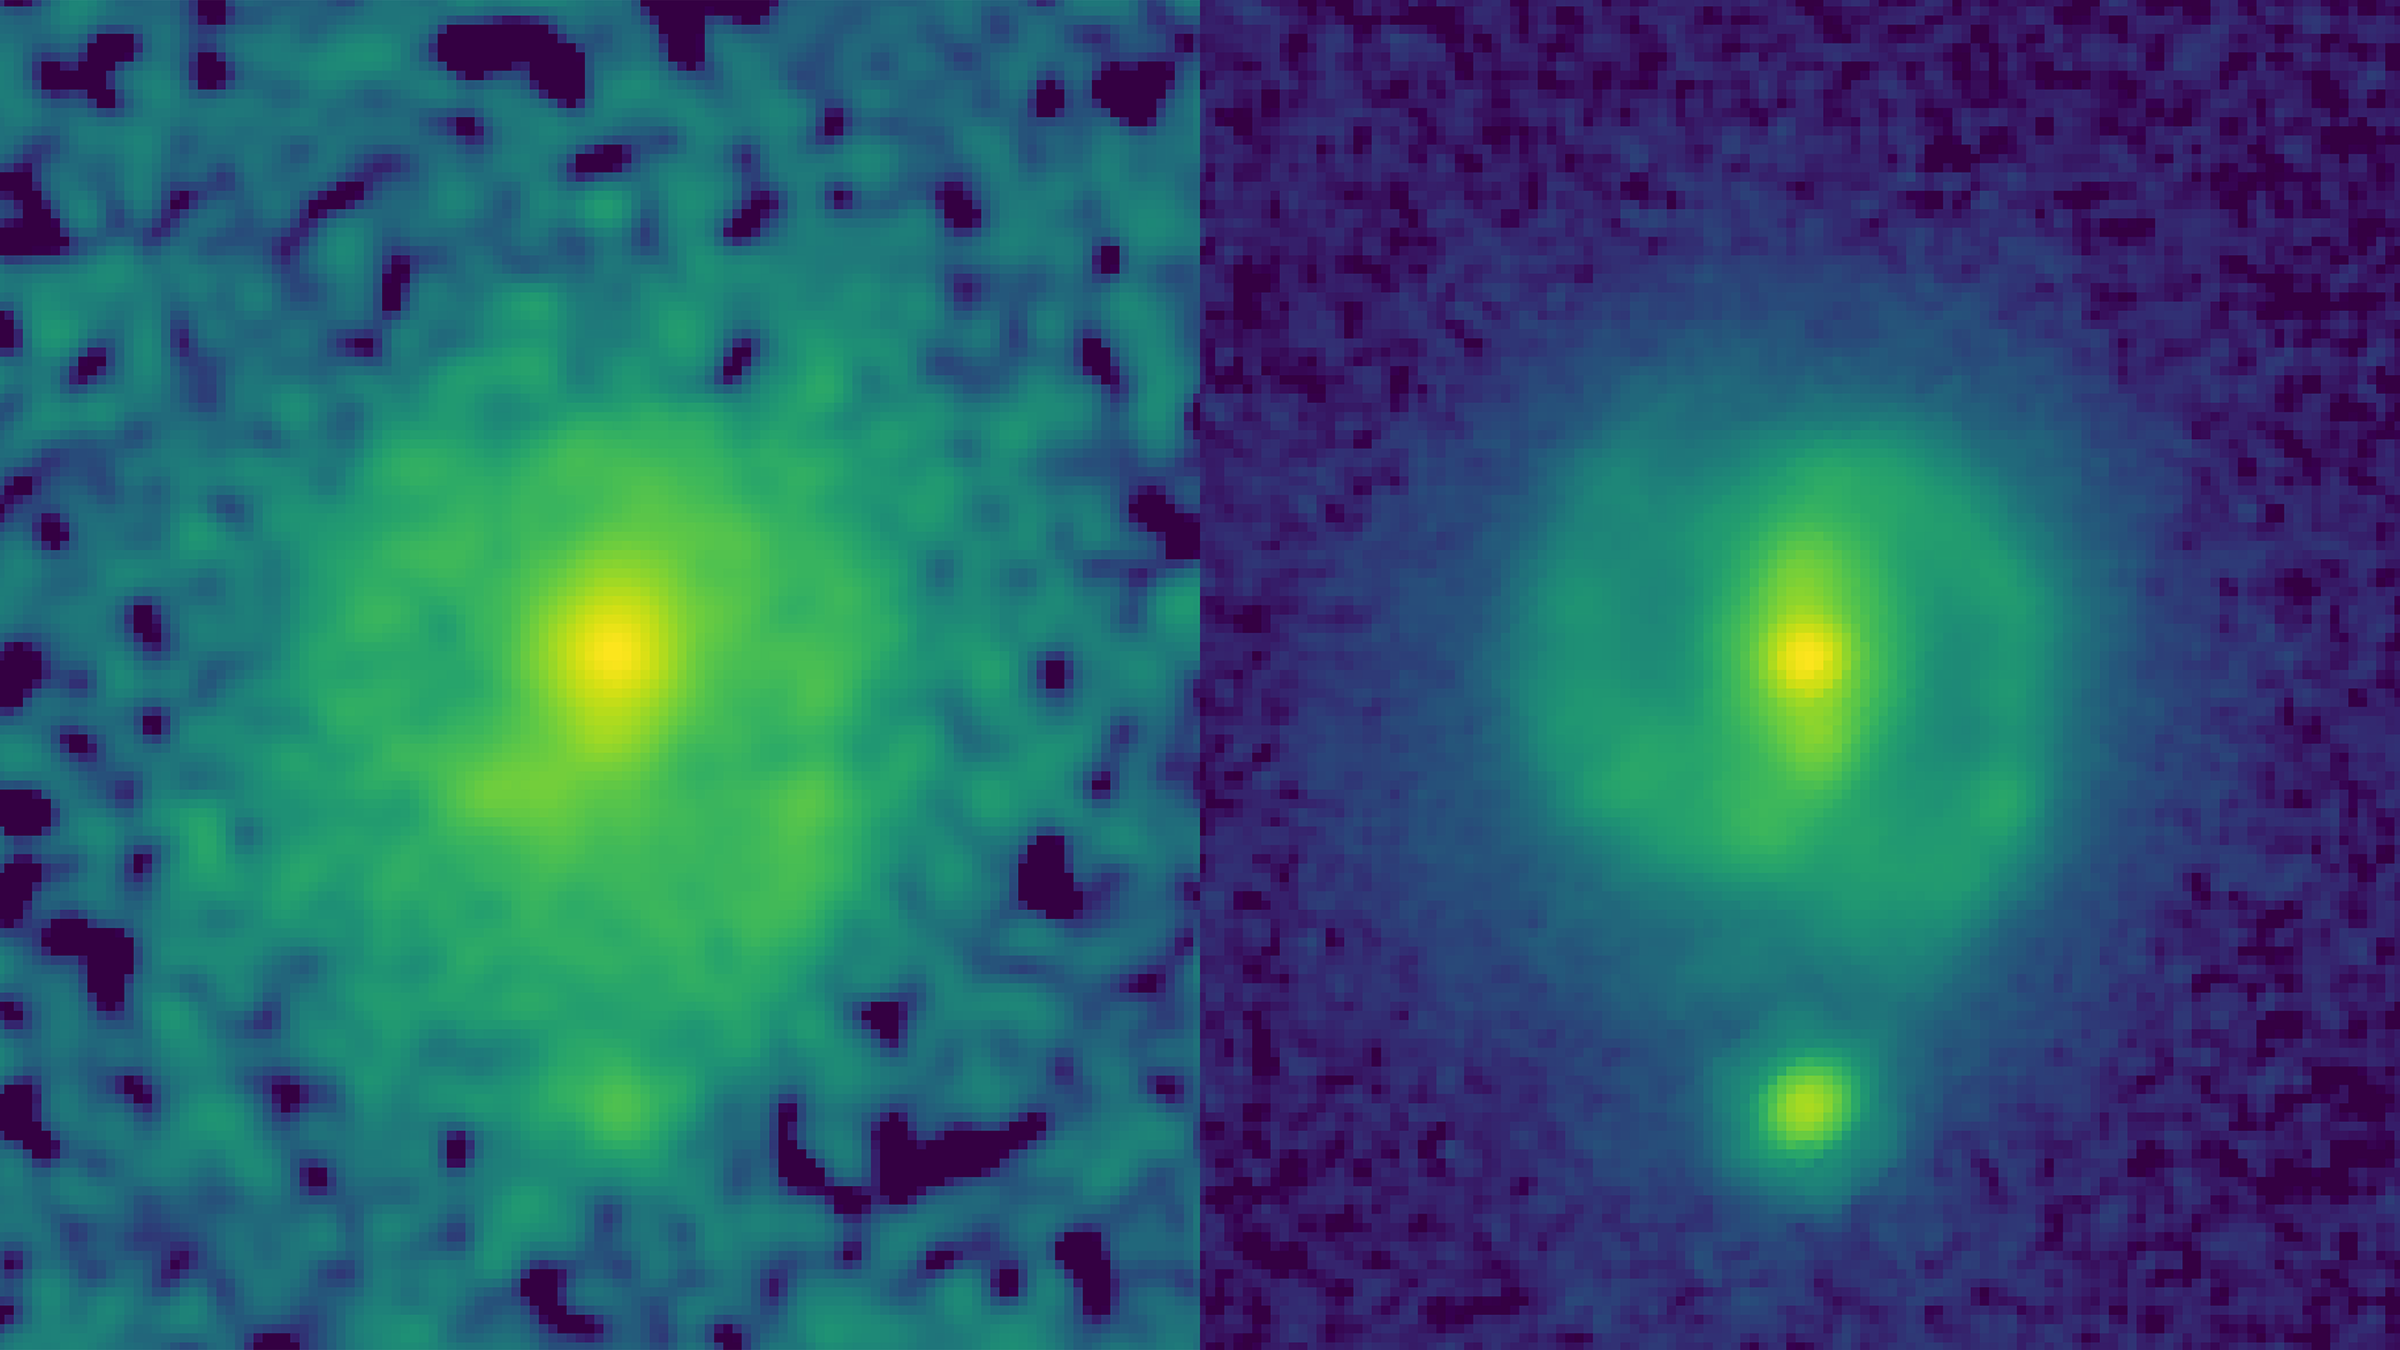 Two images of the same galaxy, one blurry, the other with crisp spiral arms and a central bar